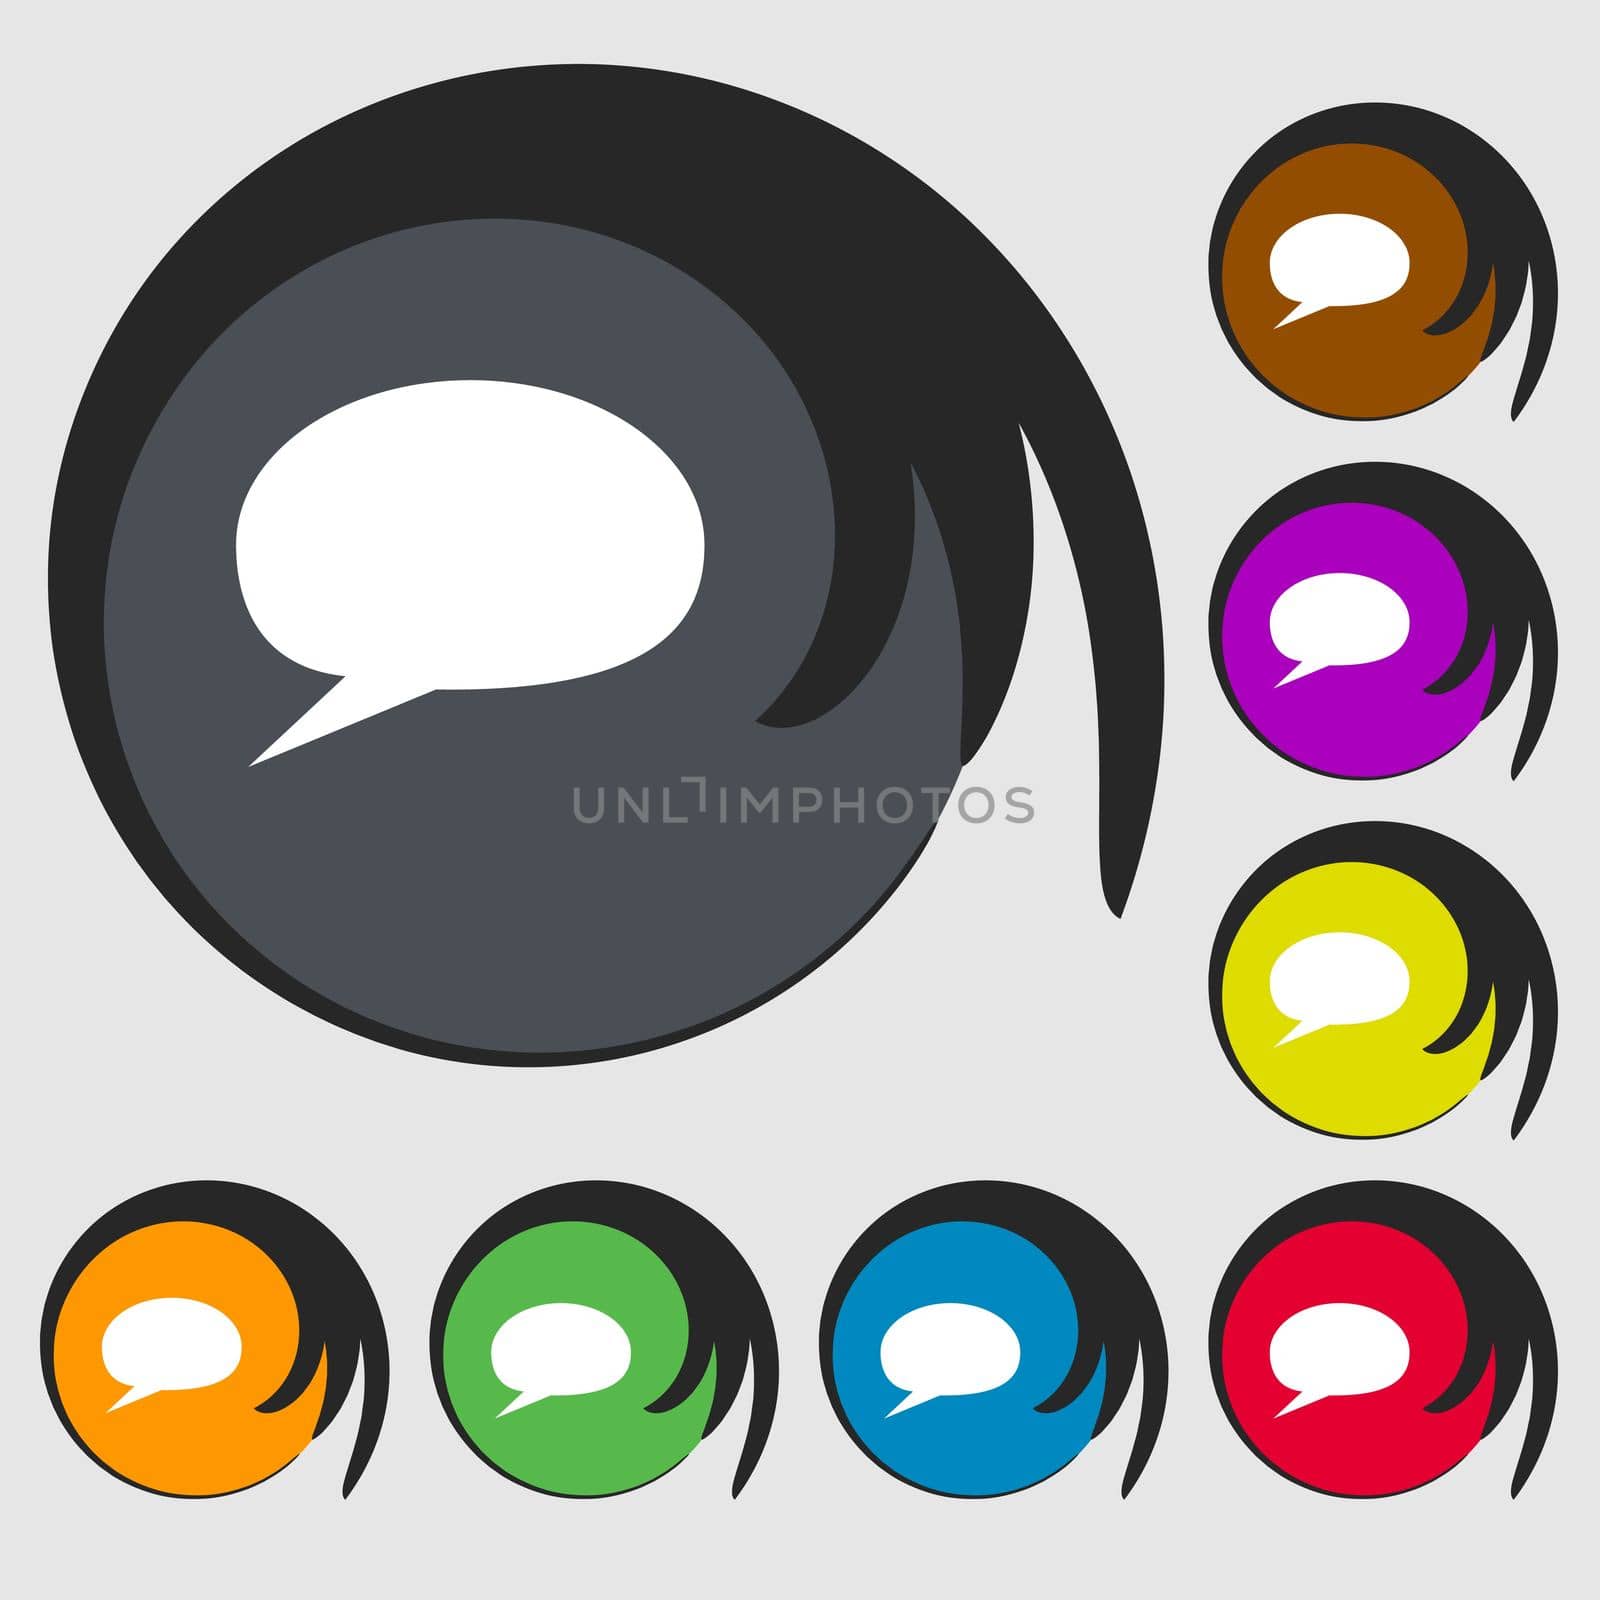 Speech bubble icons. Think cloud symbols. Symbols on eight colored buttons. illustration